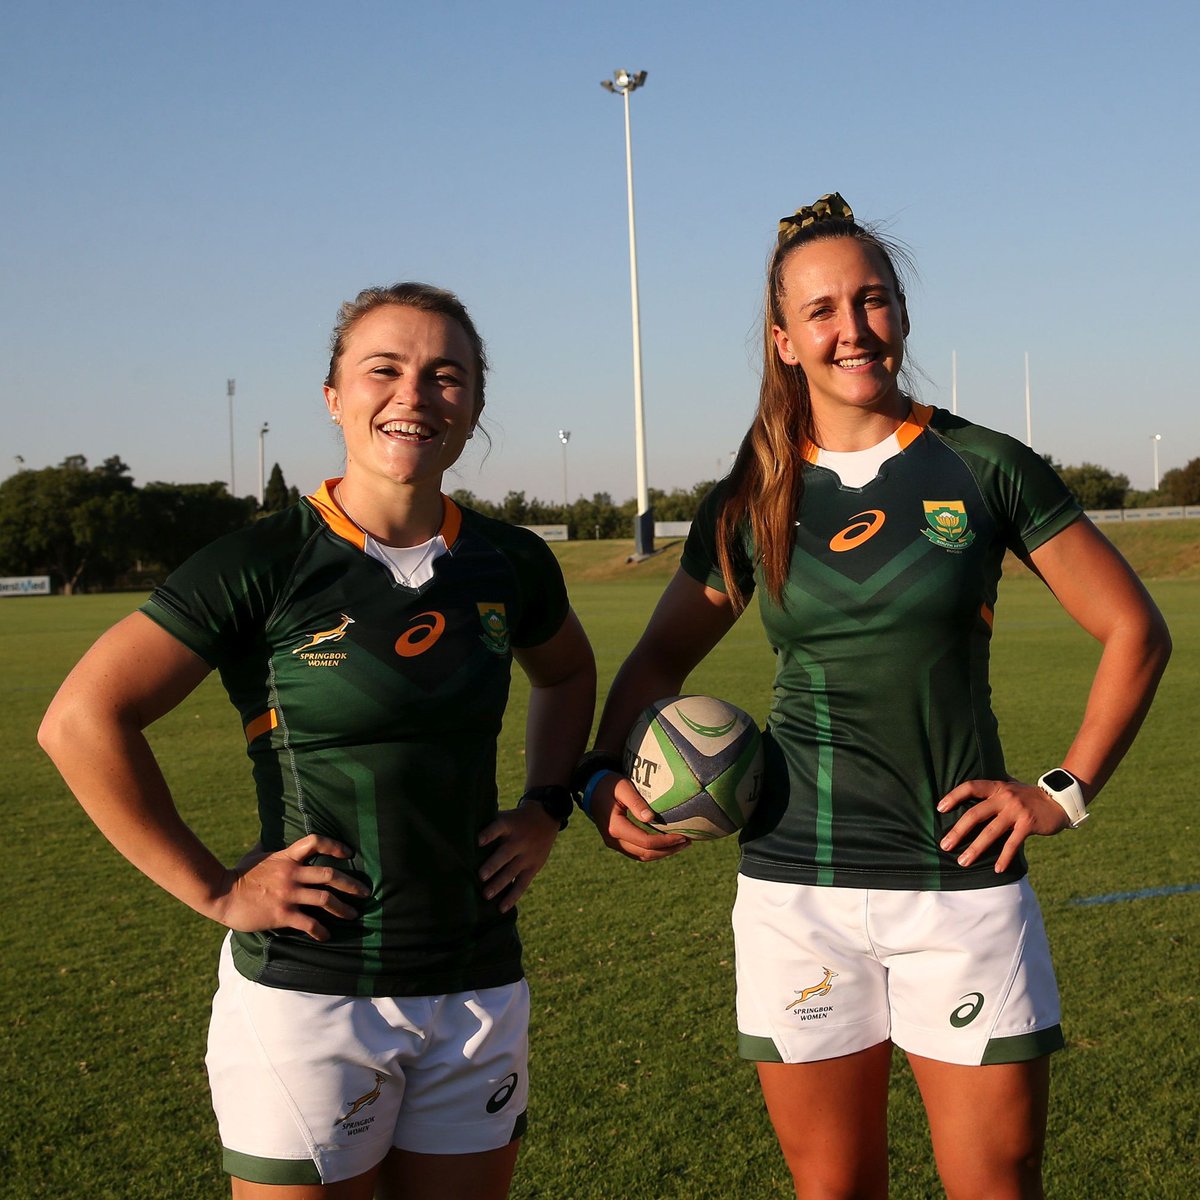 #TuksWomensRugby: #ProudlyUP 

All the best of luck to Rumandi Potgieter and Libbie Janse van Rensburg, who are part of the #WomenBoks squad for the current #NovemberSeries2021 in Europe.

#Elevate2Greatness 🌟💡

[Photo credit: #regcaldecott]